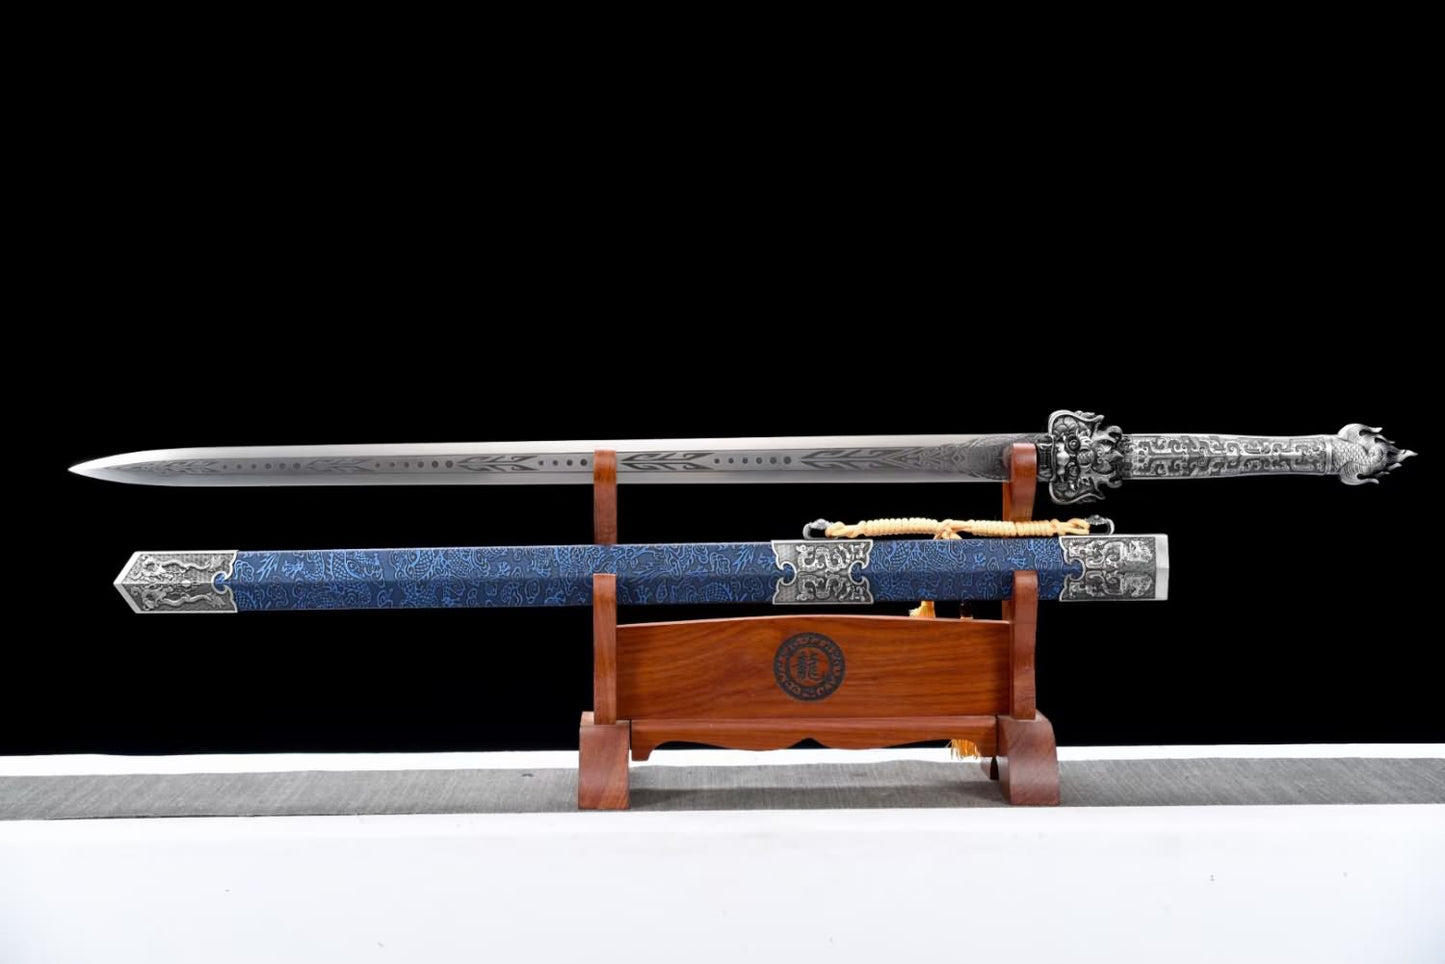 War Sword with Forged Spring Steel Engraved Pattern Blade,Alloy Fittings,44” Full Length